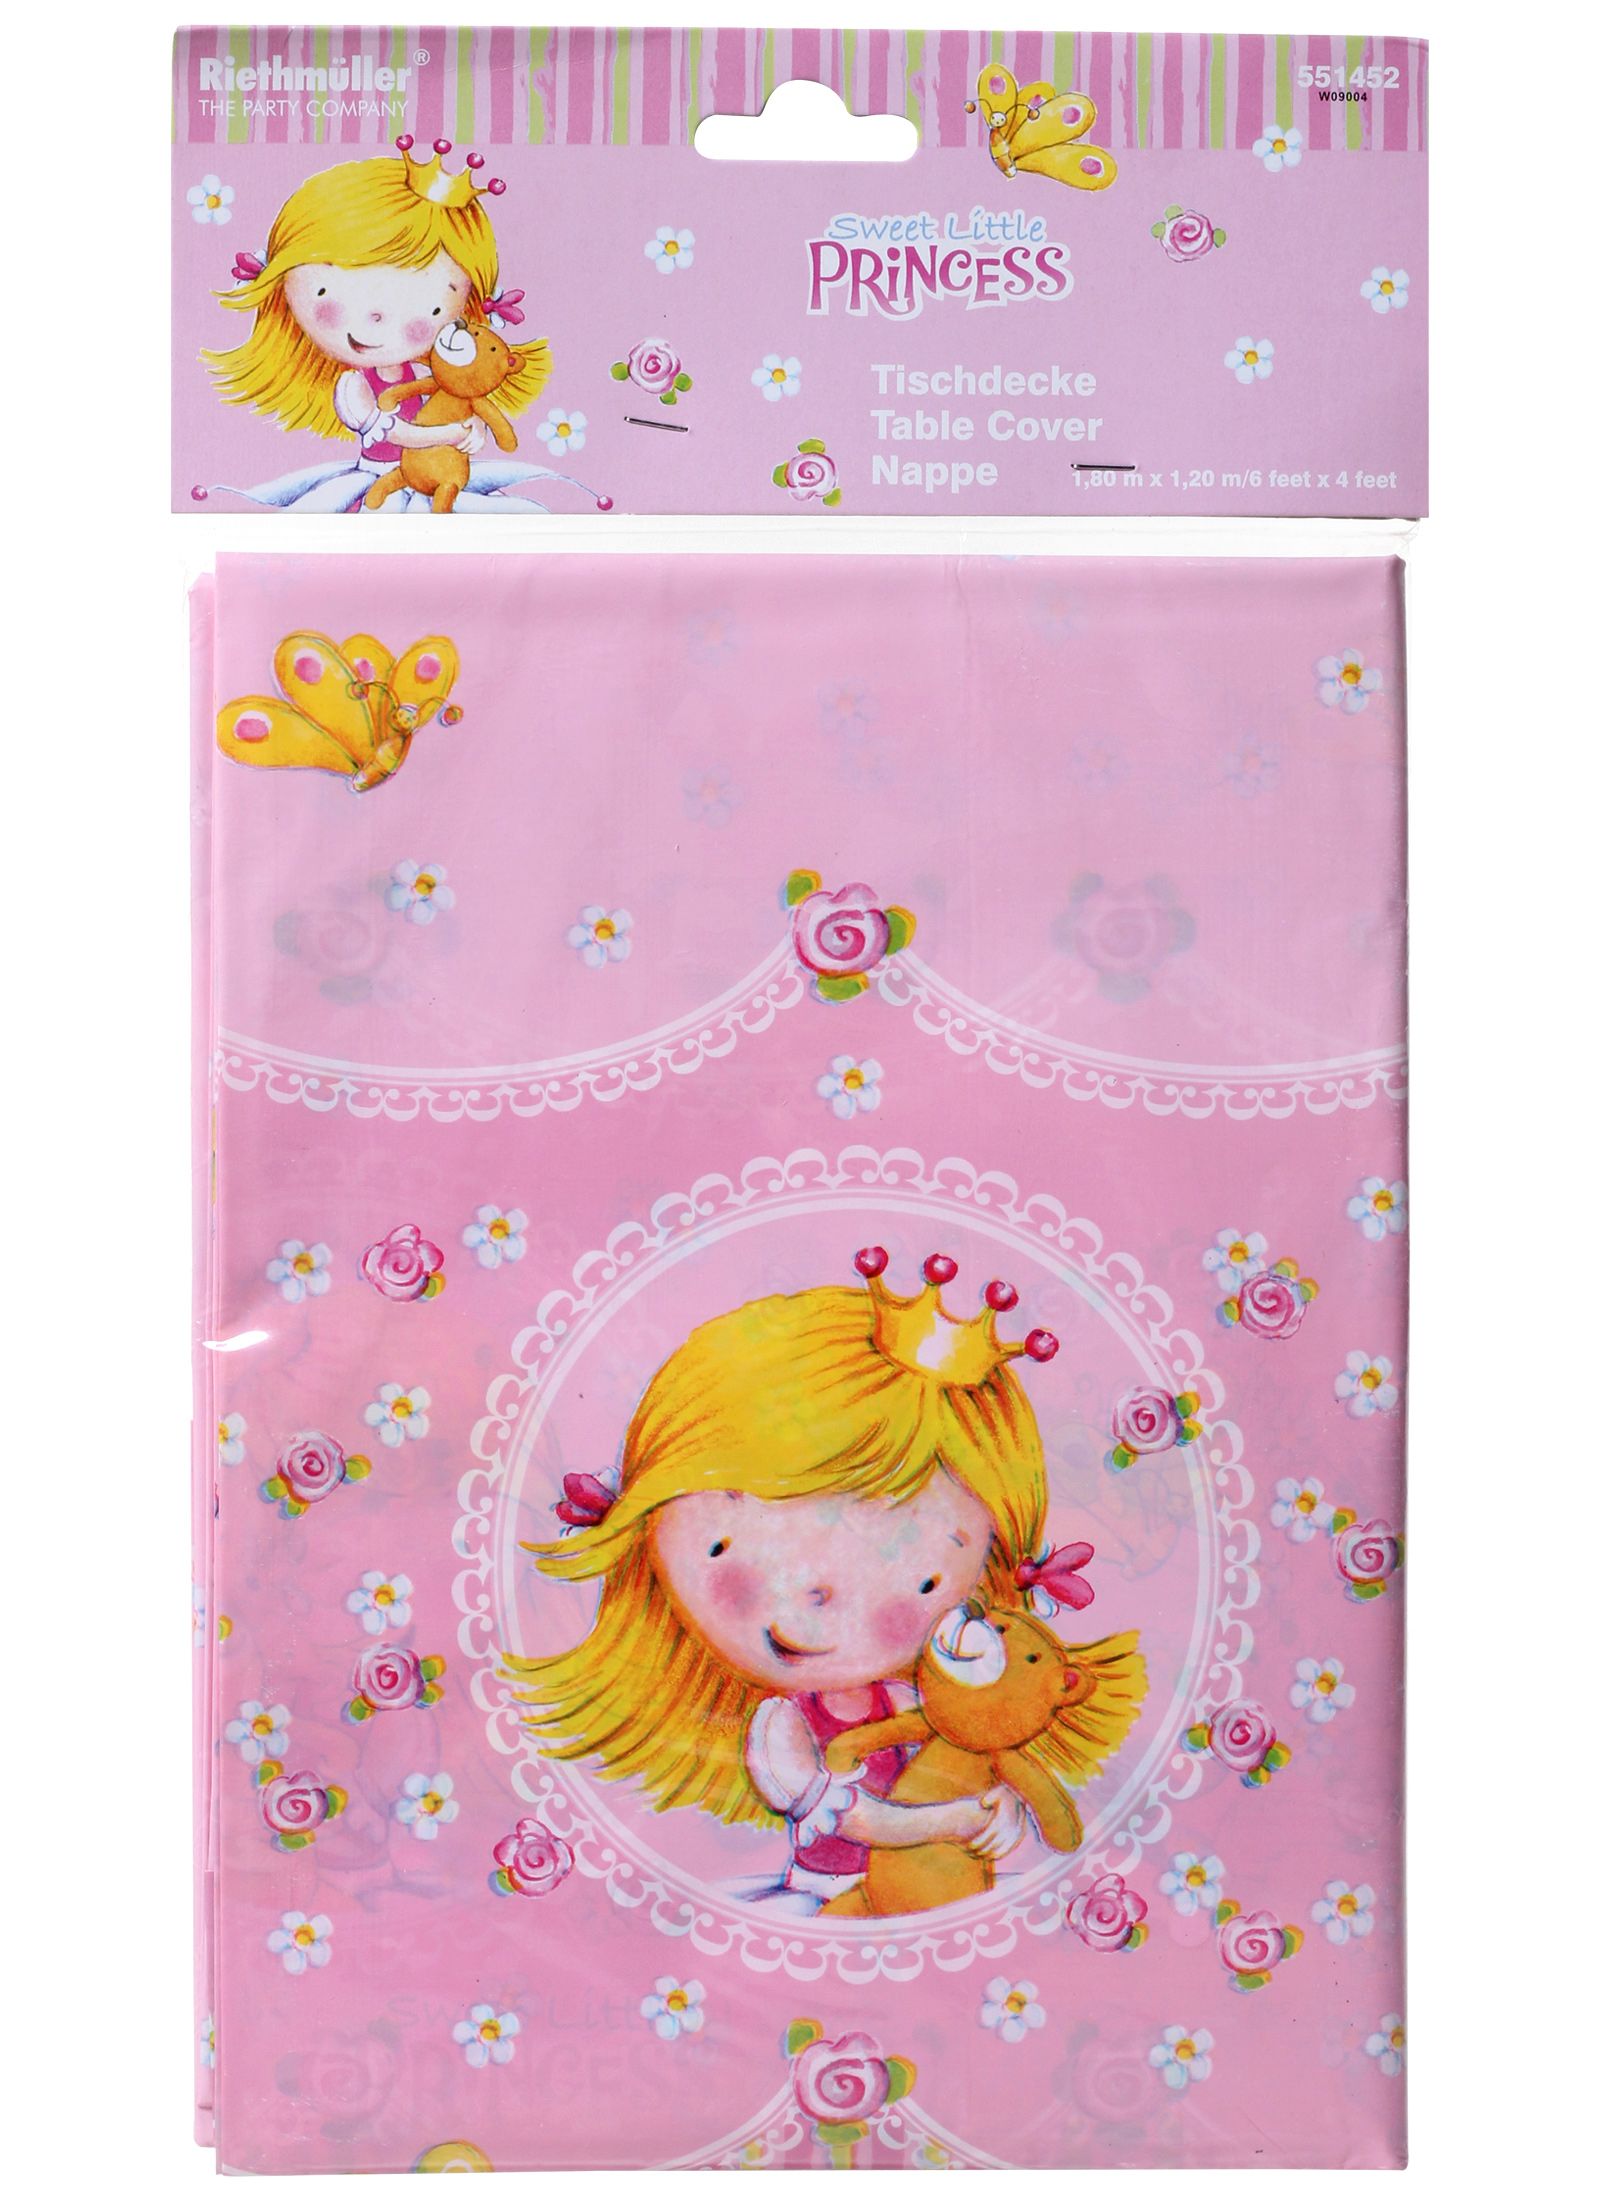 Riethmuller - Sweet Little Princess Table Cover